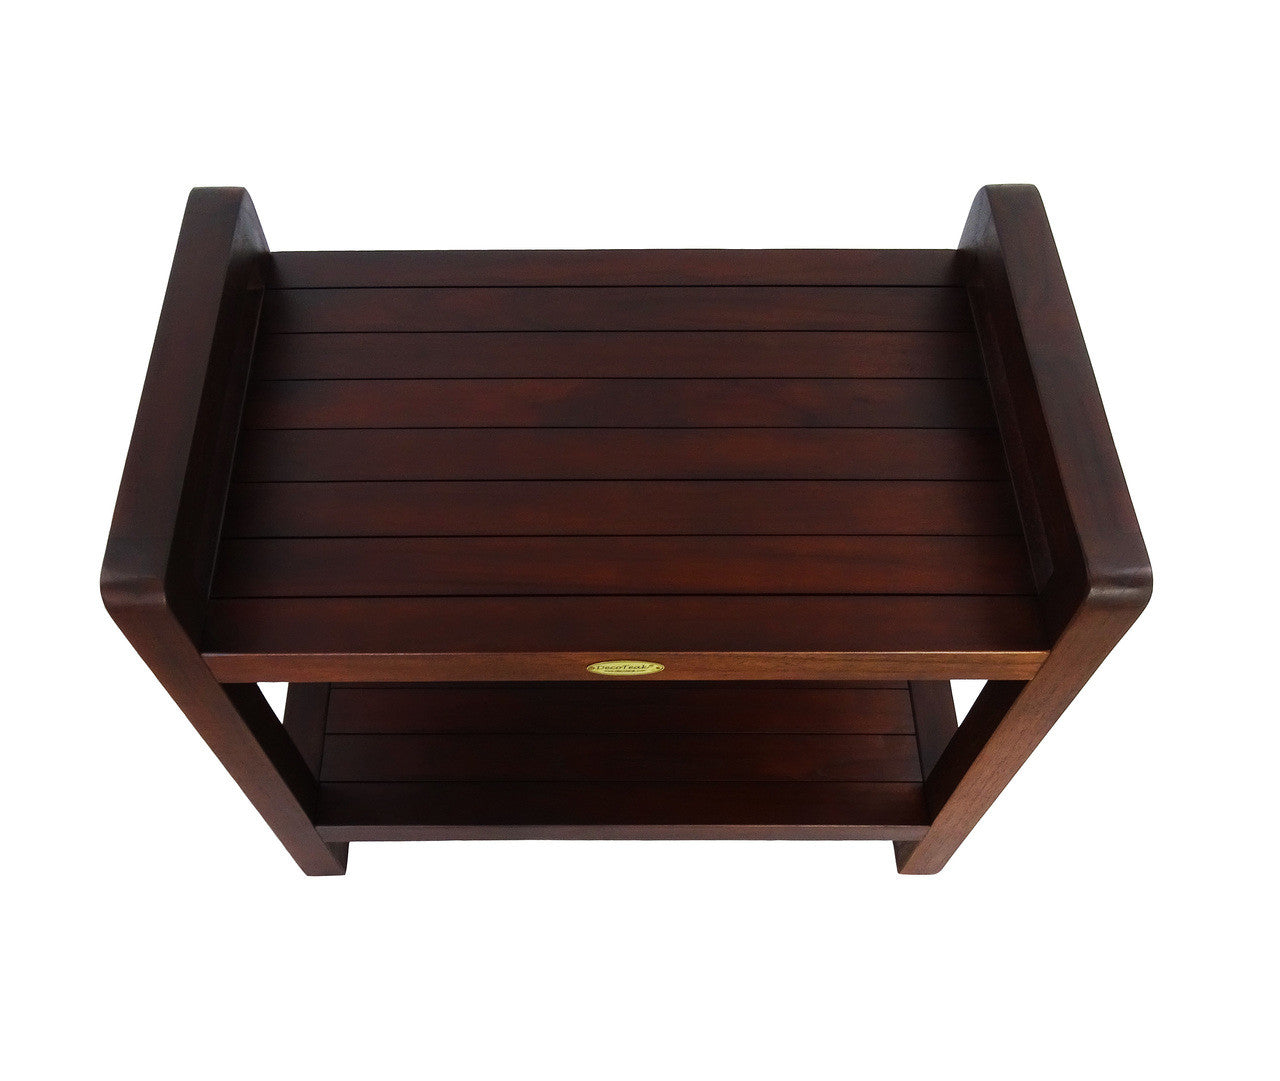 DecoTeak® Eleganto® 24" Teak Wood Shower Bench with LiftAide Arms and Shelf in Woodland Brown Finish